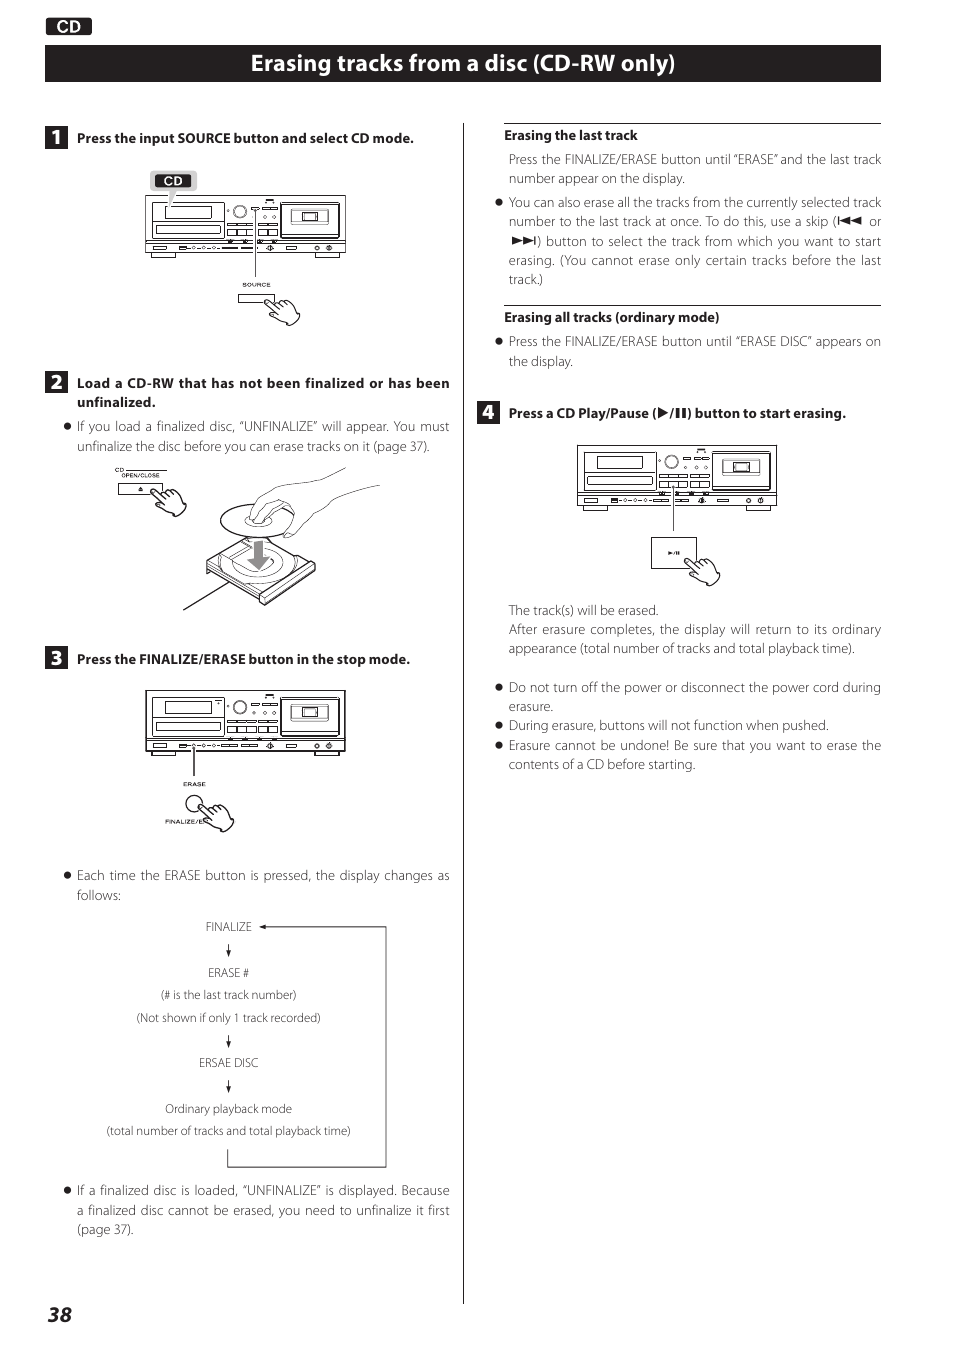 Erasing tracks from a disc (cd-rw only) | Teac AD-RW900-B User Manual | Page 38 / 148